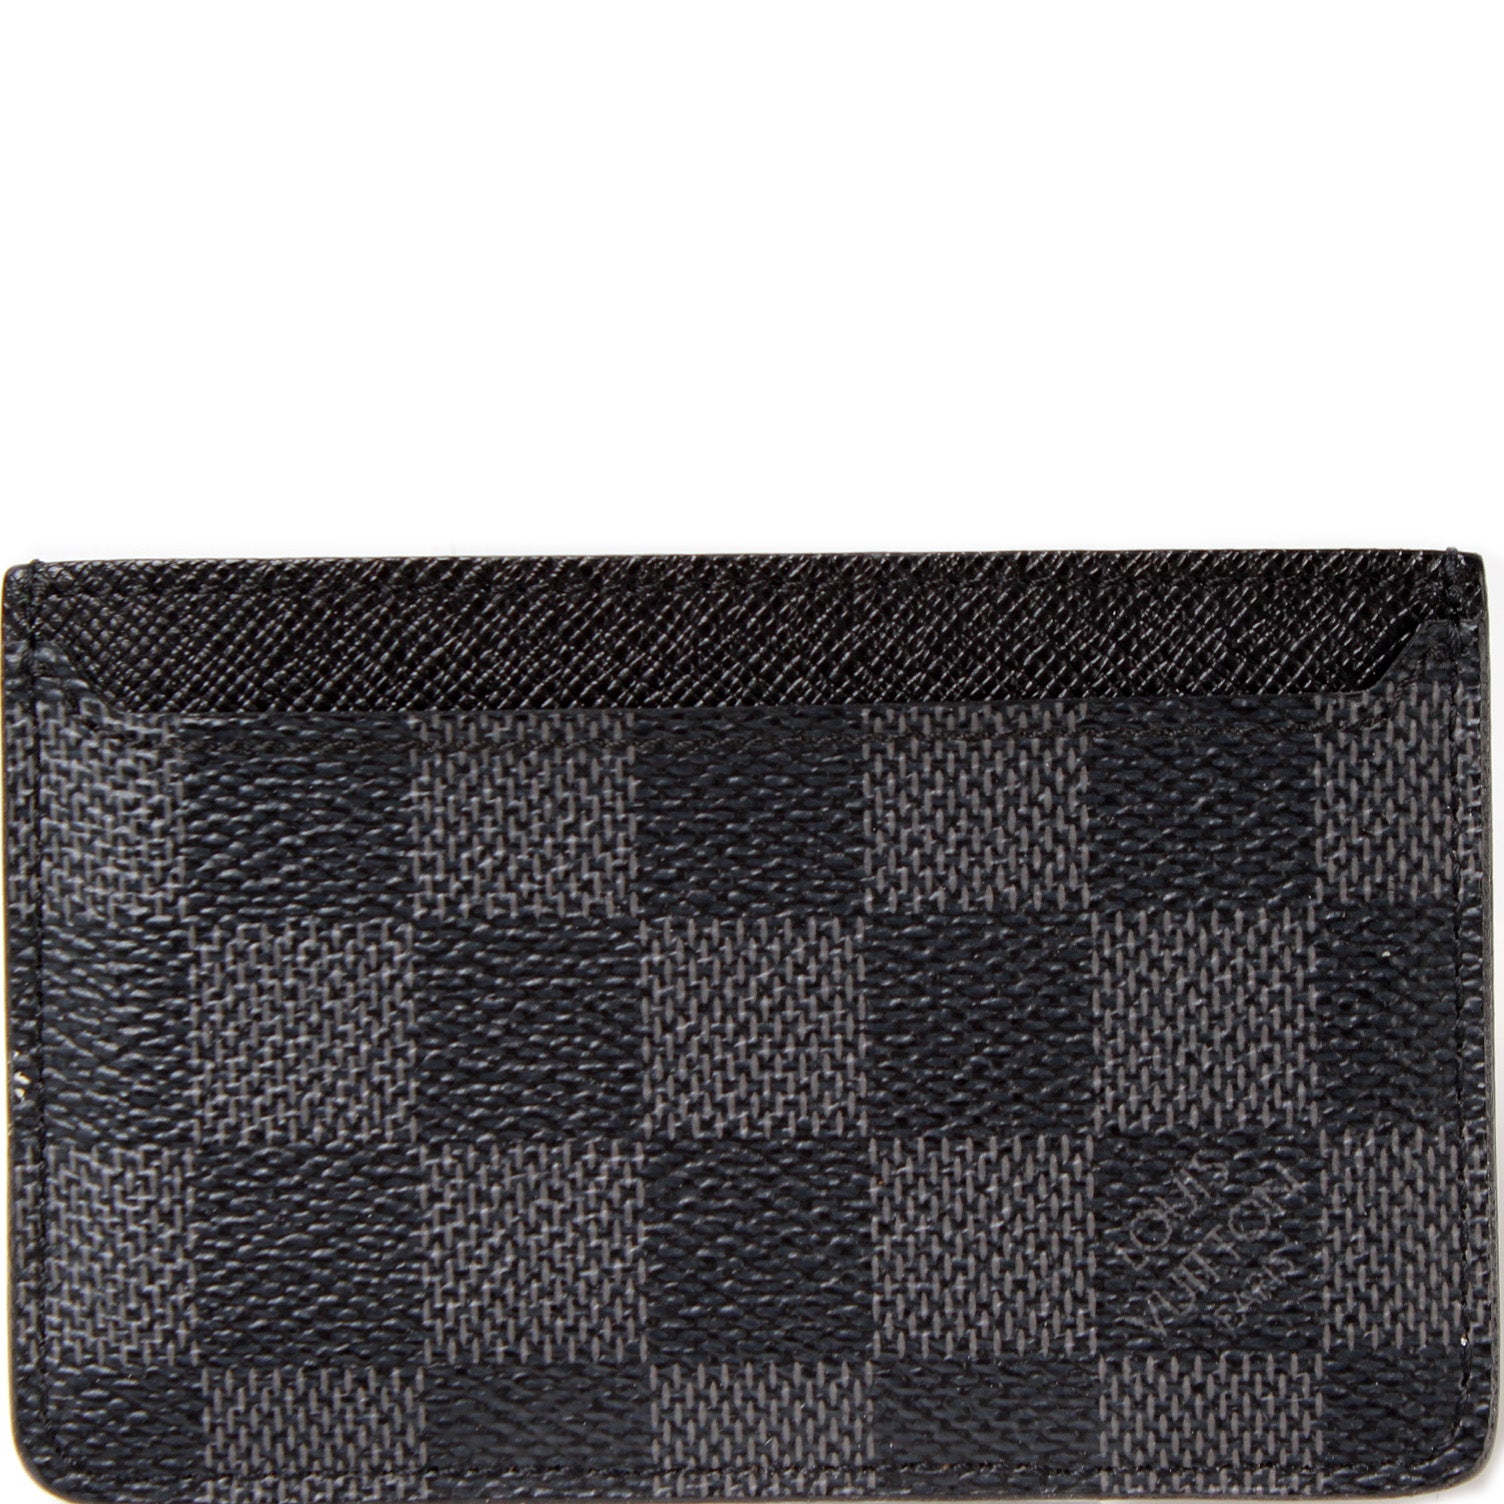 Neo Porte Cartes Damier Graphite - Wallets and Small Leather Goods